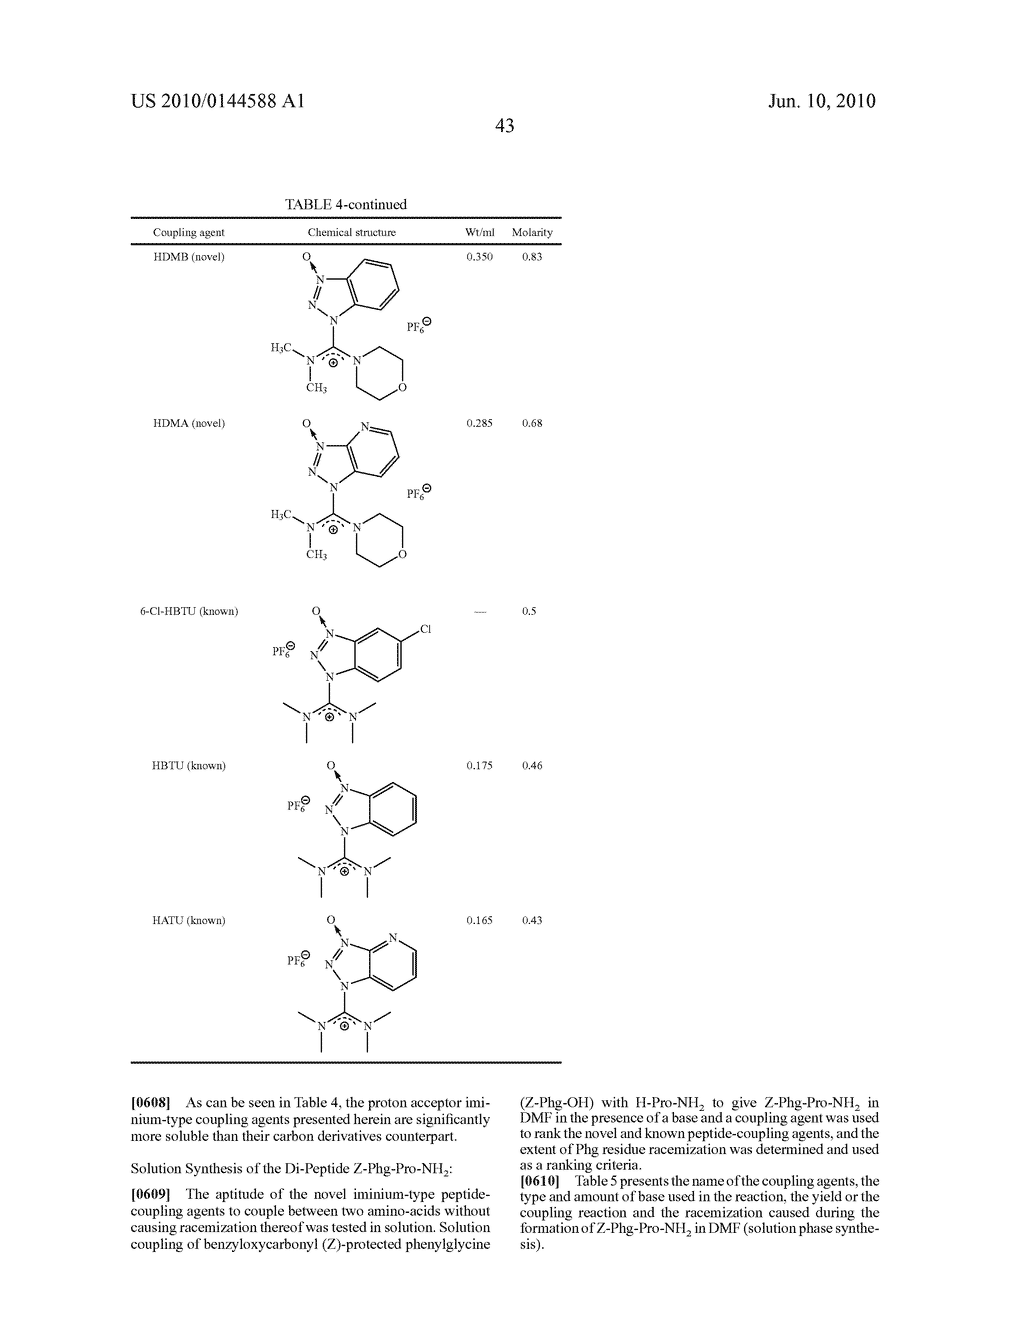 PROTON ACCEPTOR IMINIUM/CARBOCATION-TYPE COUPLING AGENTS - diagram, schematic, and image 45